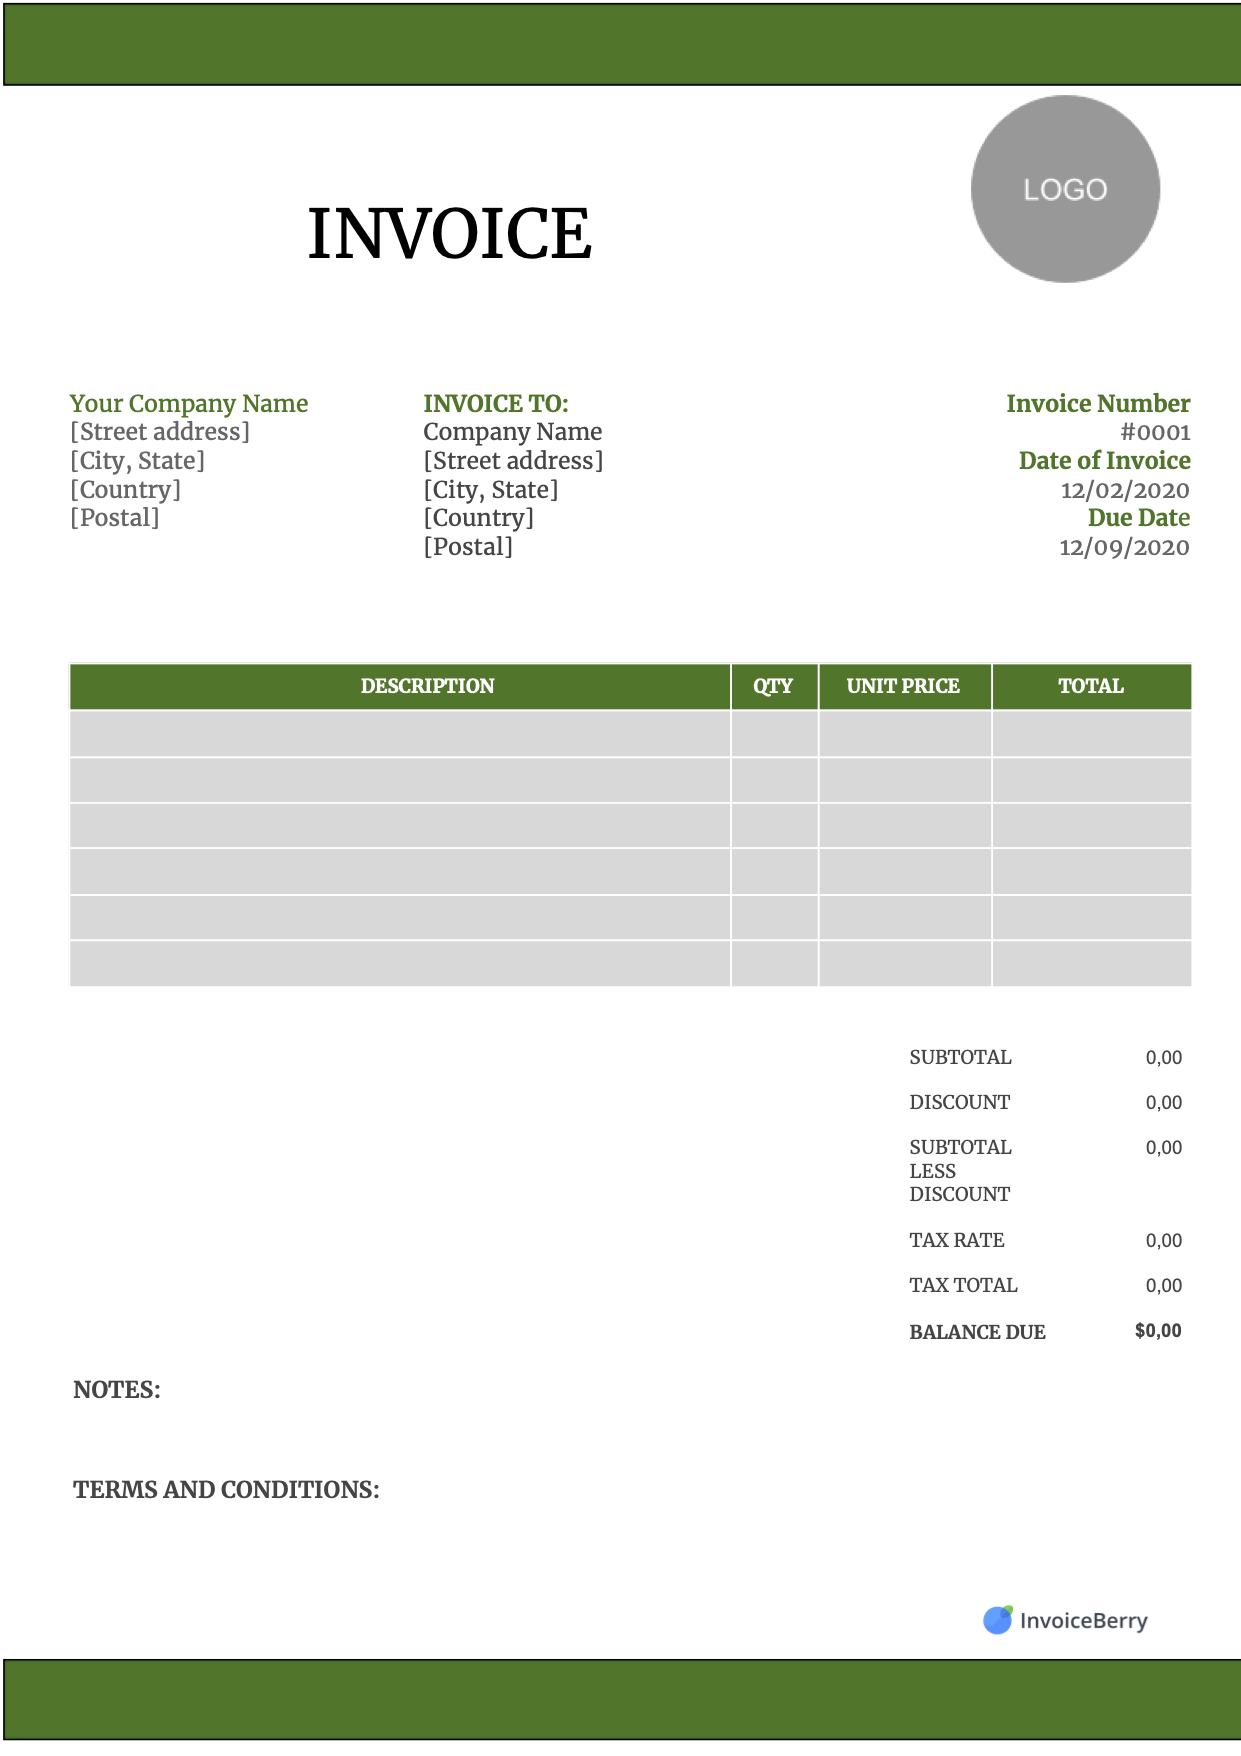 Free US Invoice Templates for Contractors and Companies  InvoiceBerry Within Usa Invoice Template